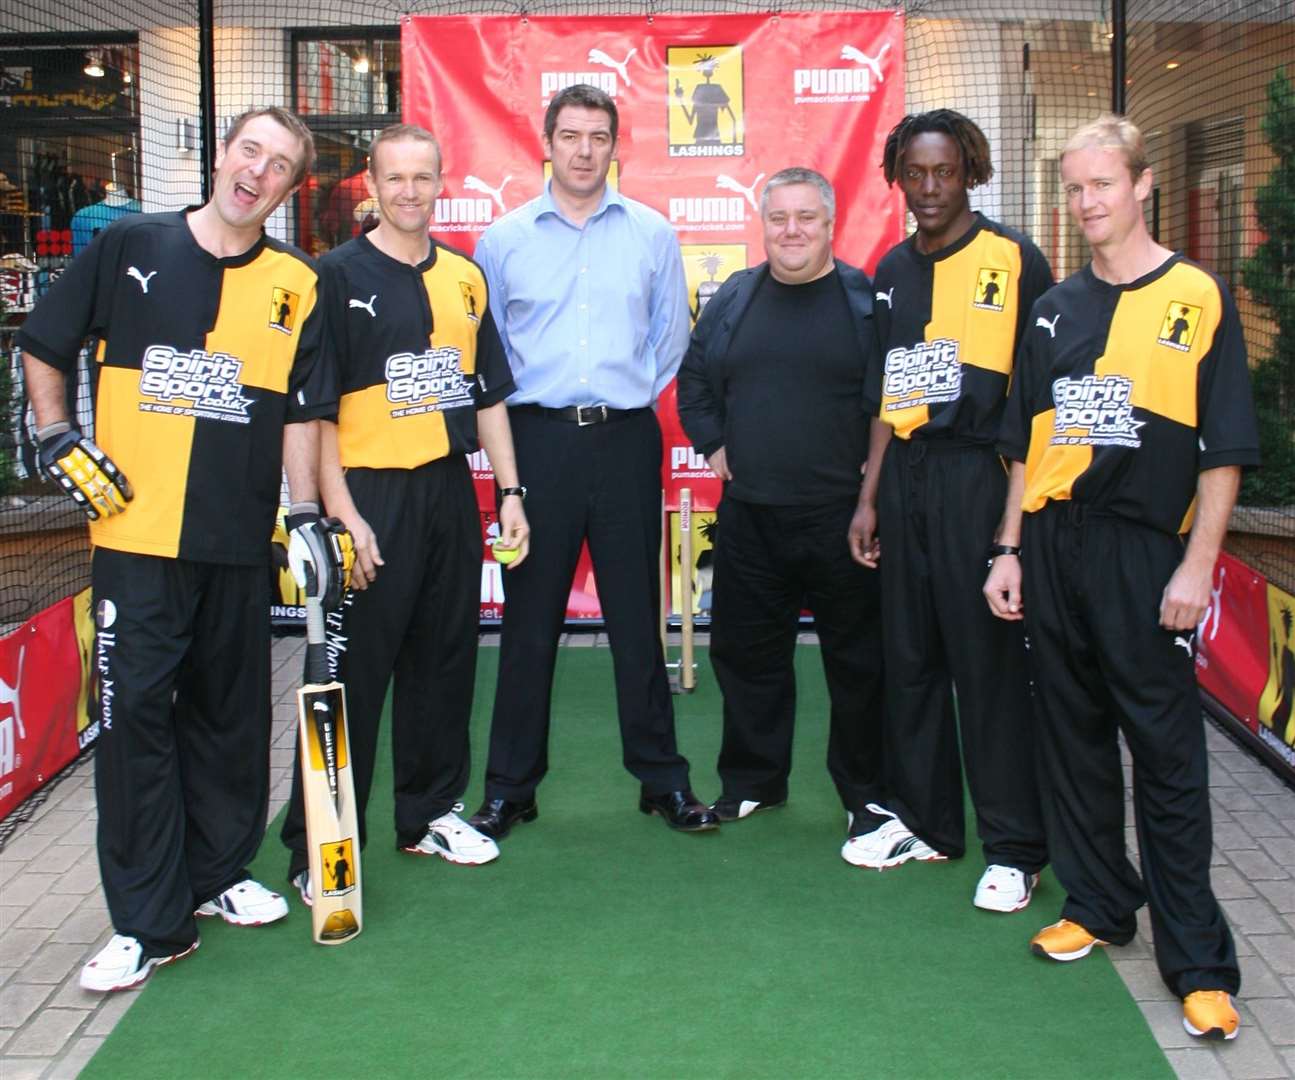 Left to right Phil Tufnell, Grant Flower, Phil Woodman, David Folb, Henry Olonga and Andy Flower, launching a sponsorship deal between Puma and Lashings in 2005